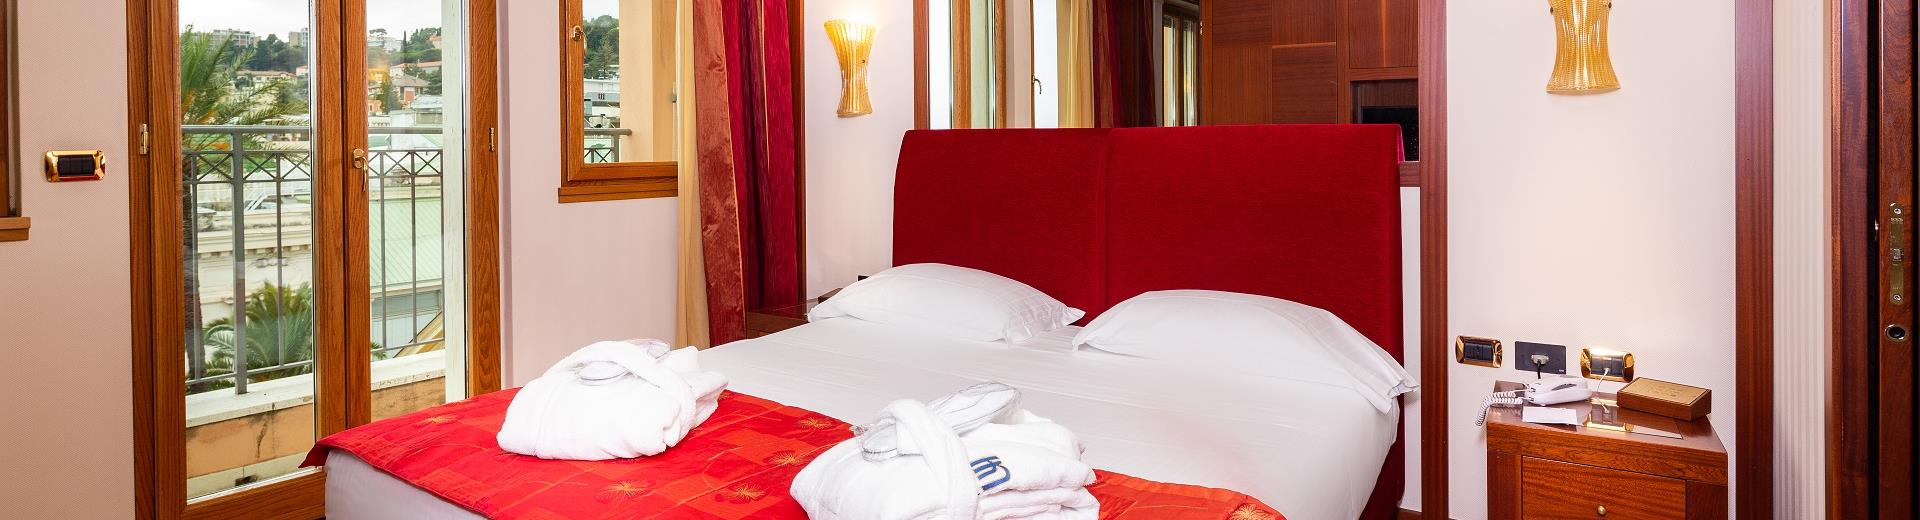 Comfort and special services in our rooms in Sanremo centro